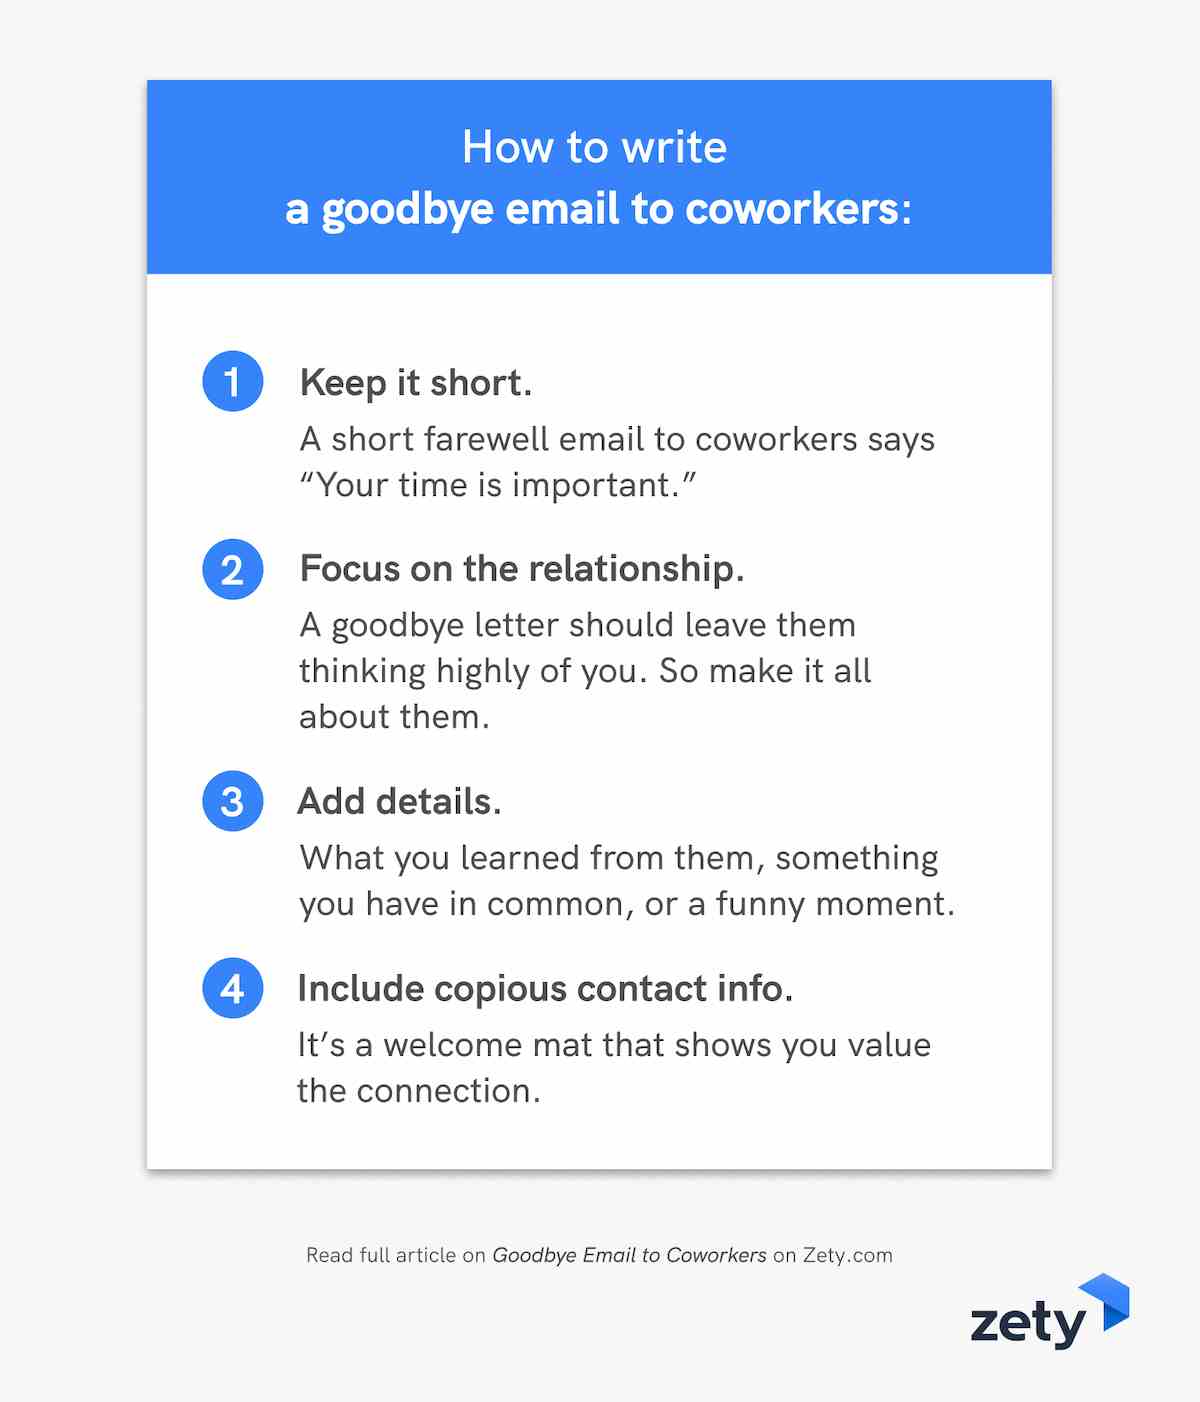 How to Write a Goodbye Email/Letter to Coworkers (Examples)